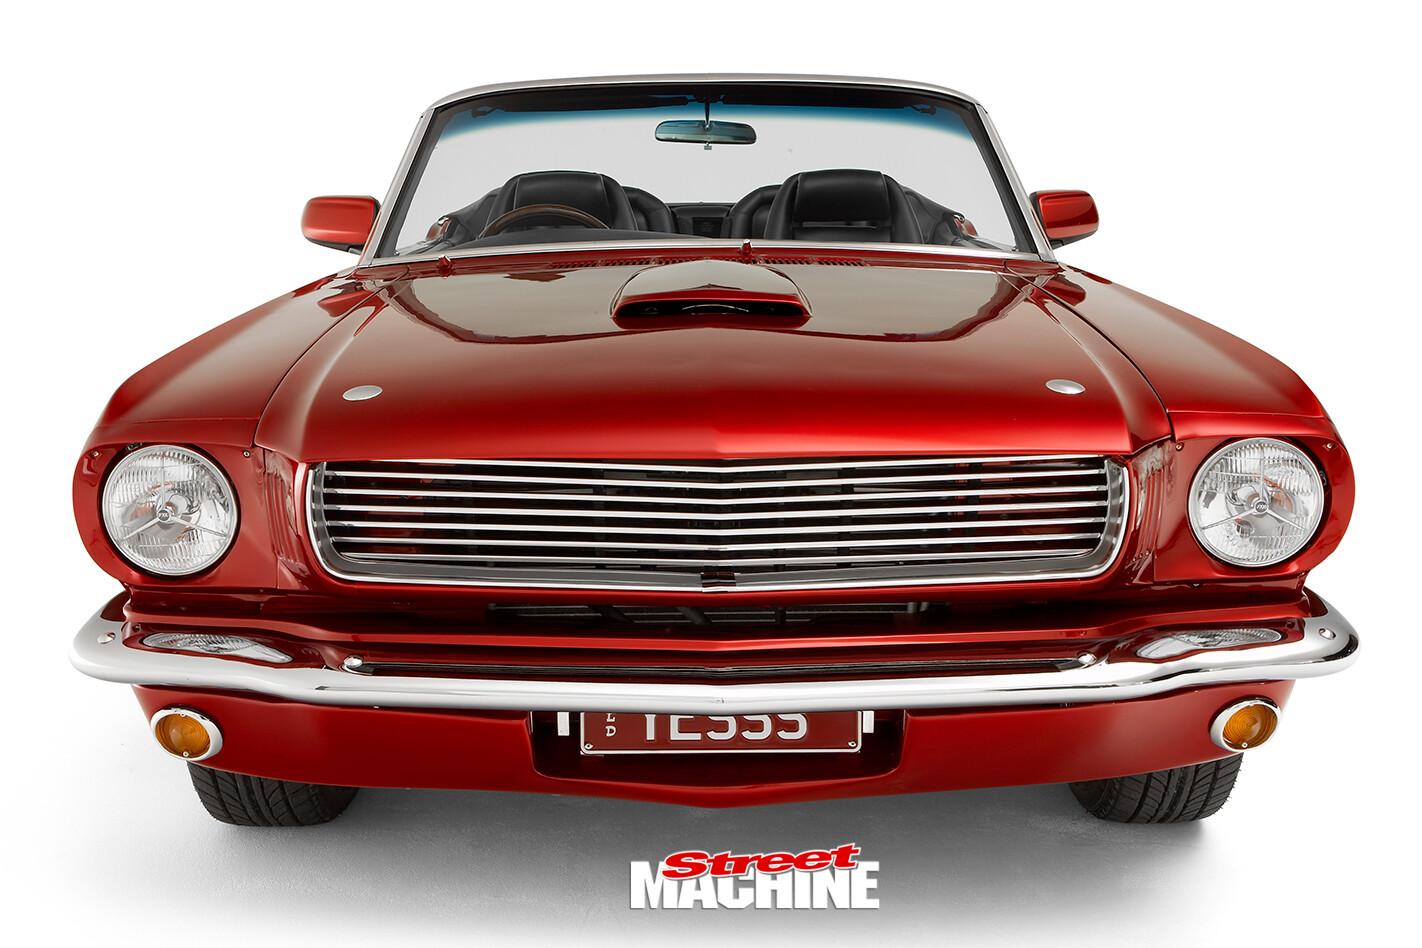 Marshall -Perron -Pro -Touring -Mustang -front